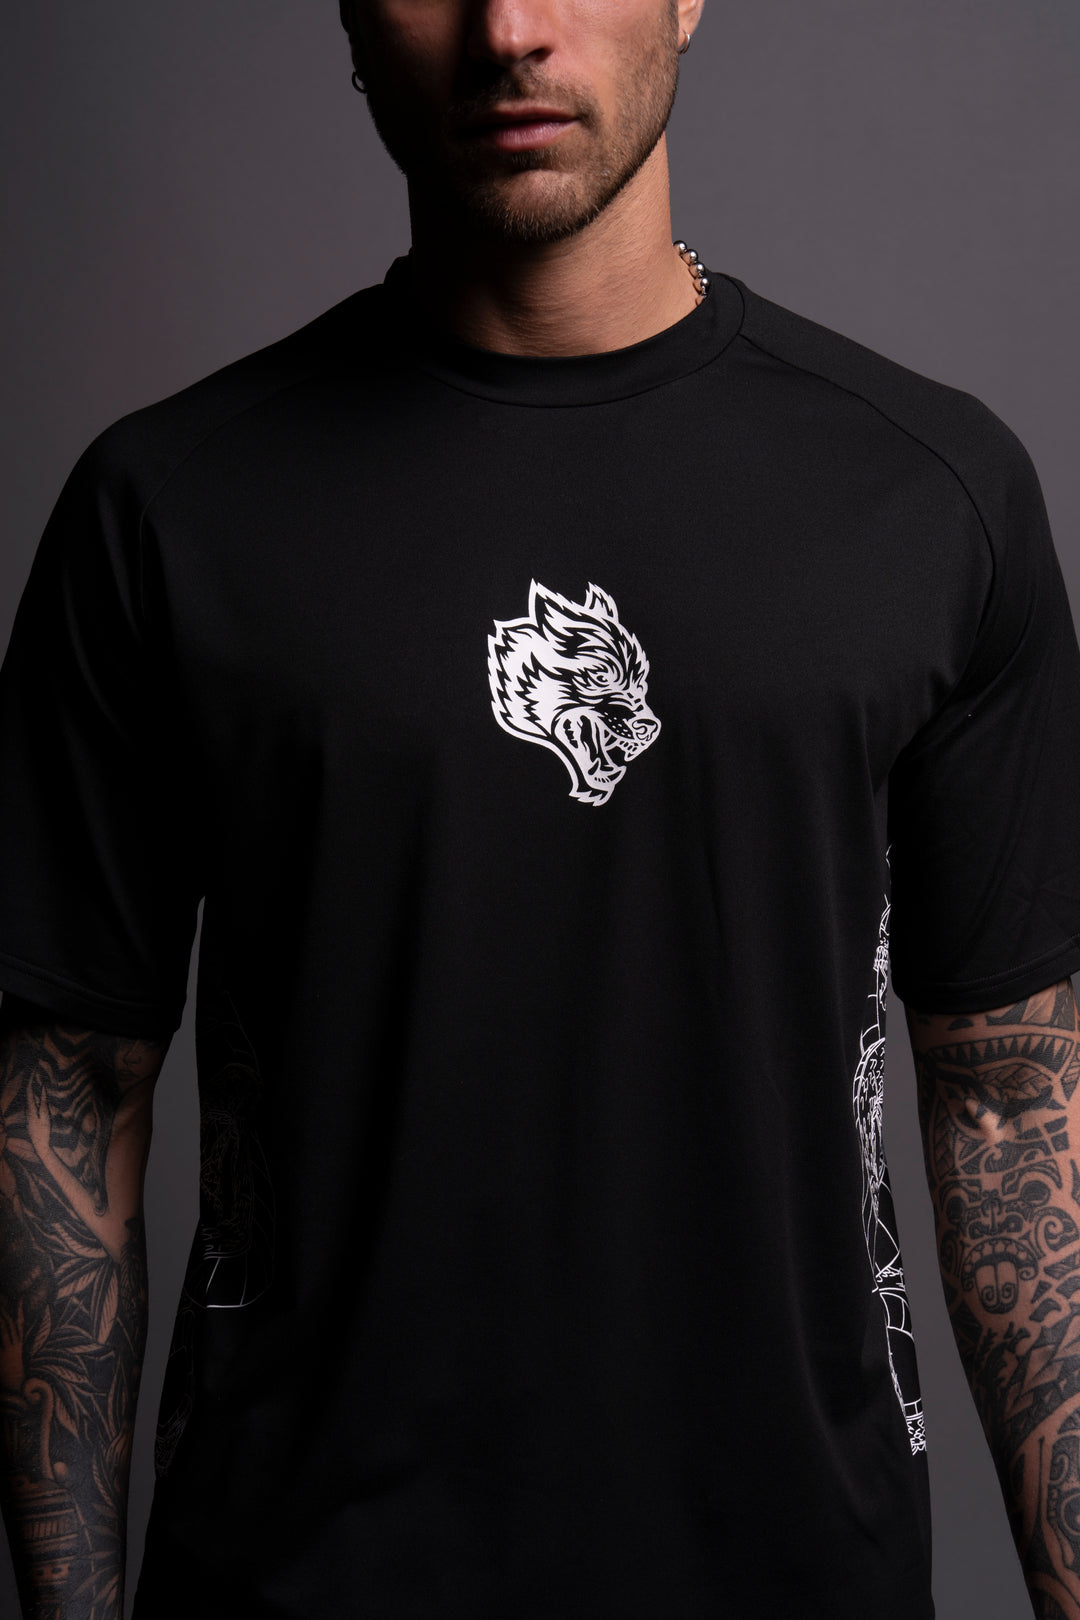 Our Wish "Dry Wolf" S/S Raglan Tee in Black